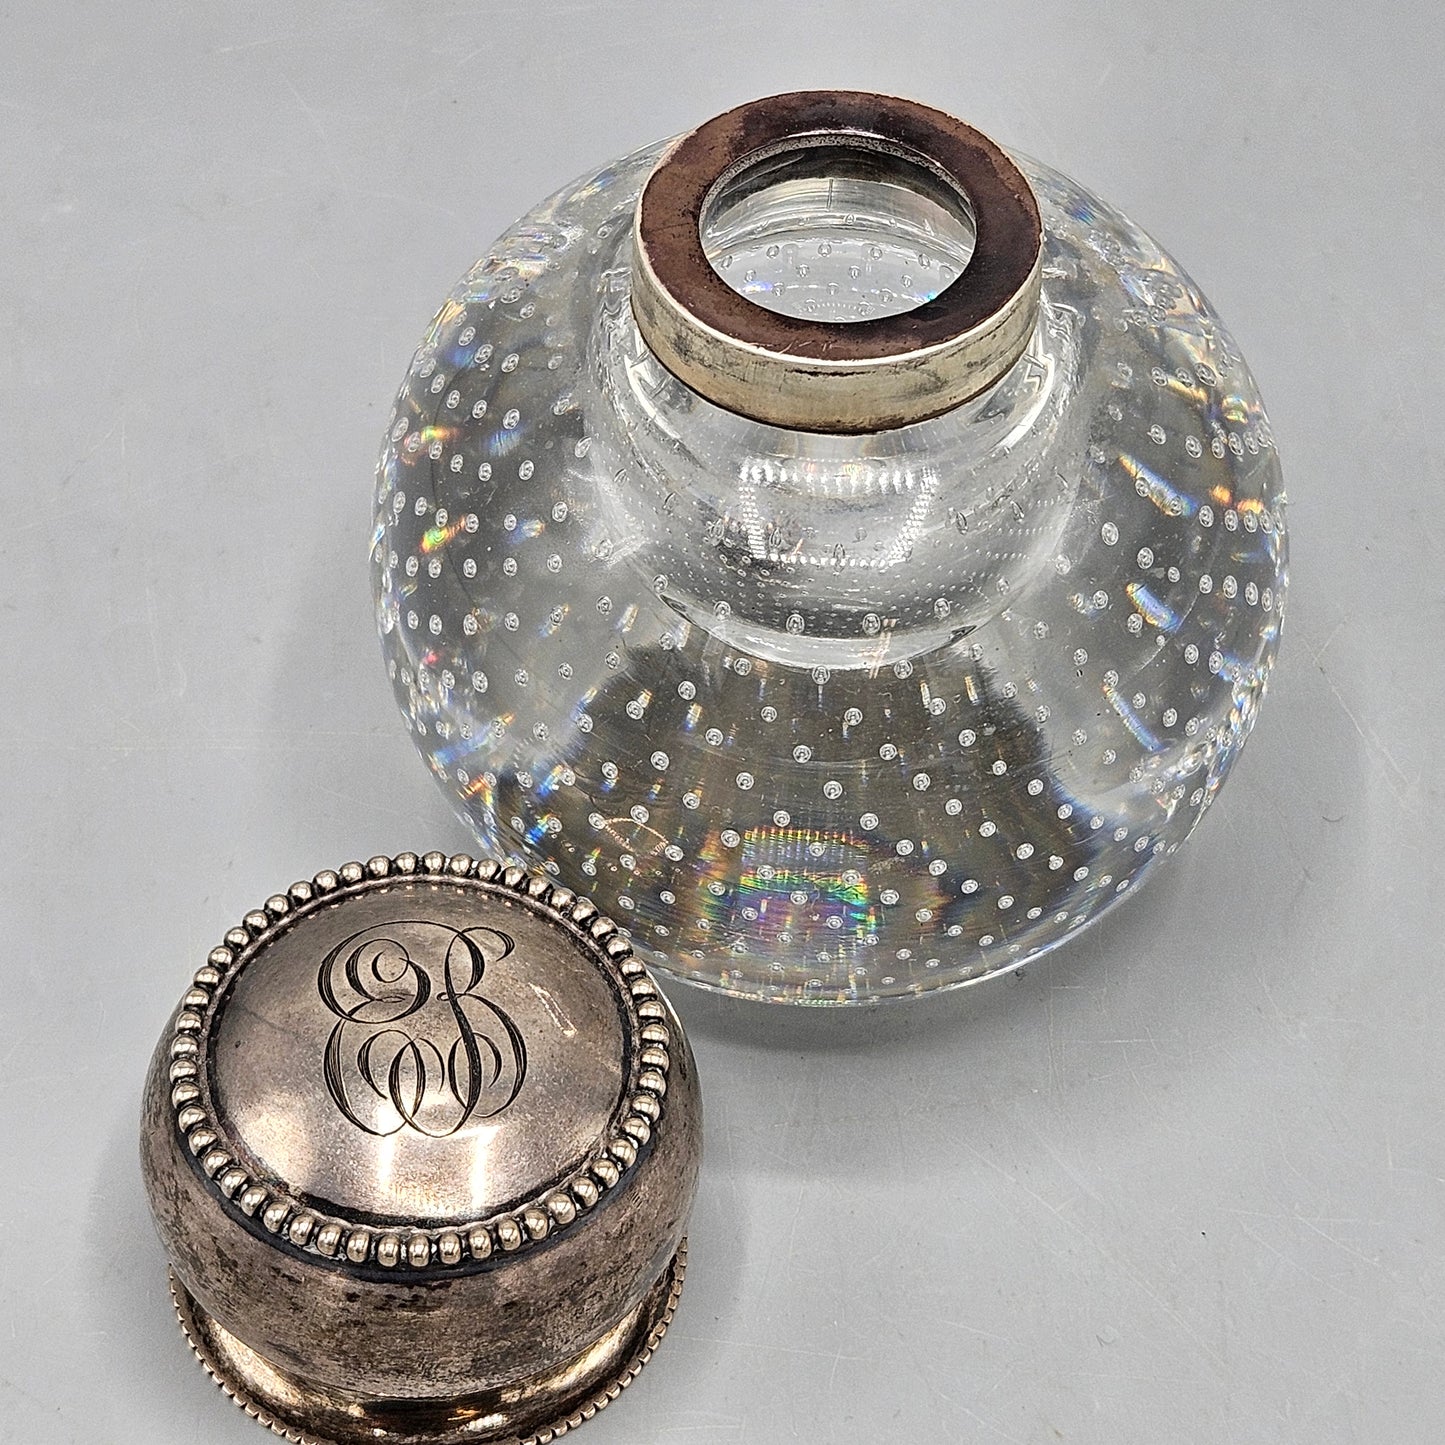 Antique Controlled Bubble Inkwell with Sterling Silver Lid Monogrammed